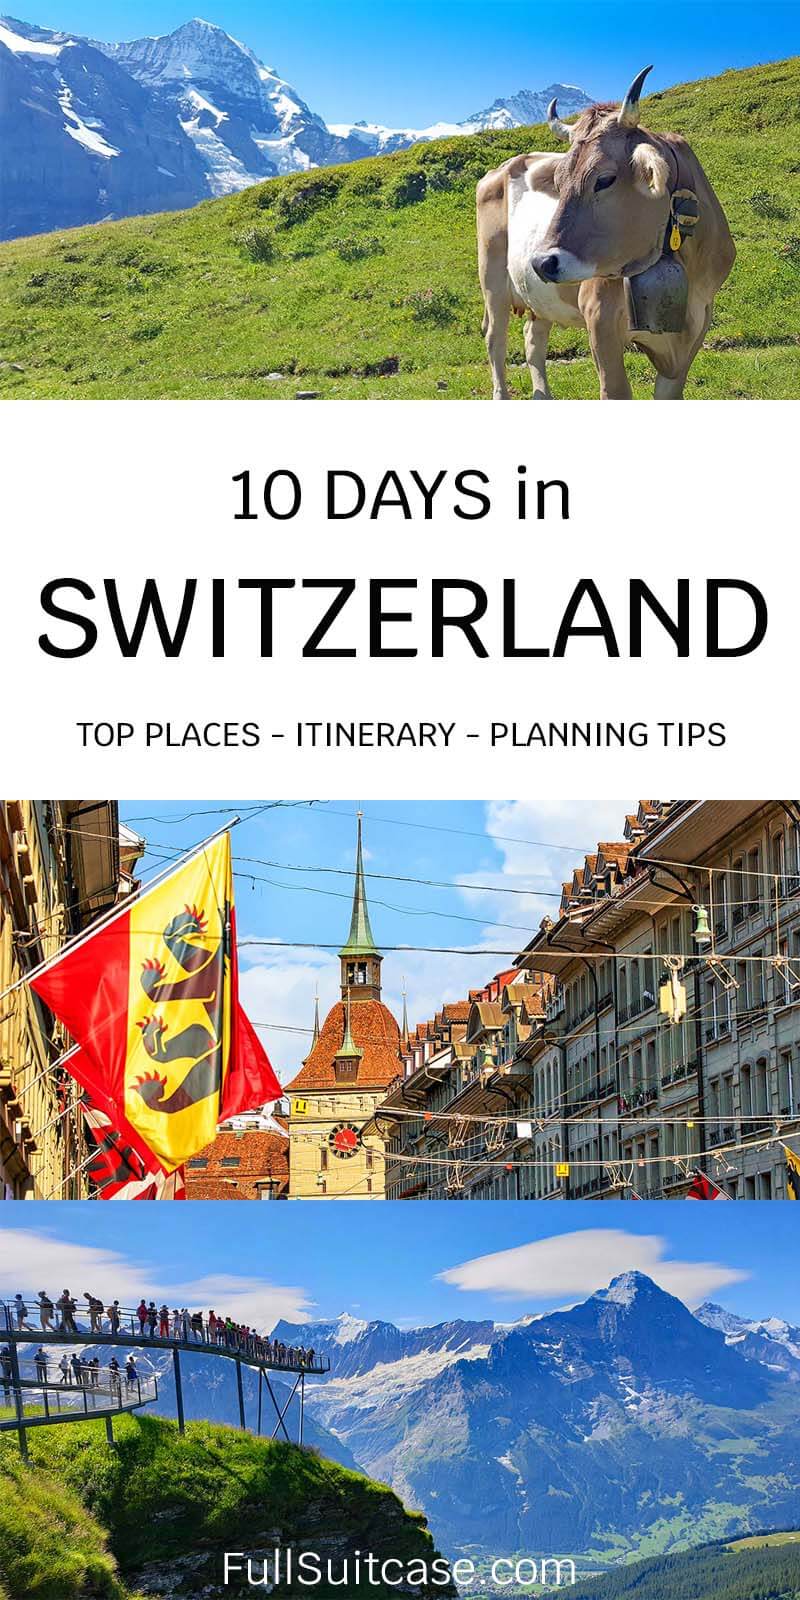 How to spend 10 days in Switzerland - top places to visit, trip itinerary and planning tips